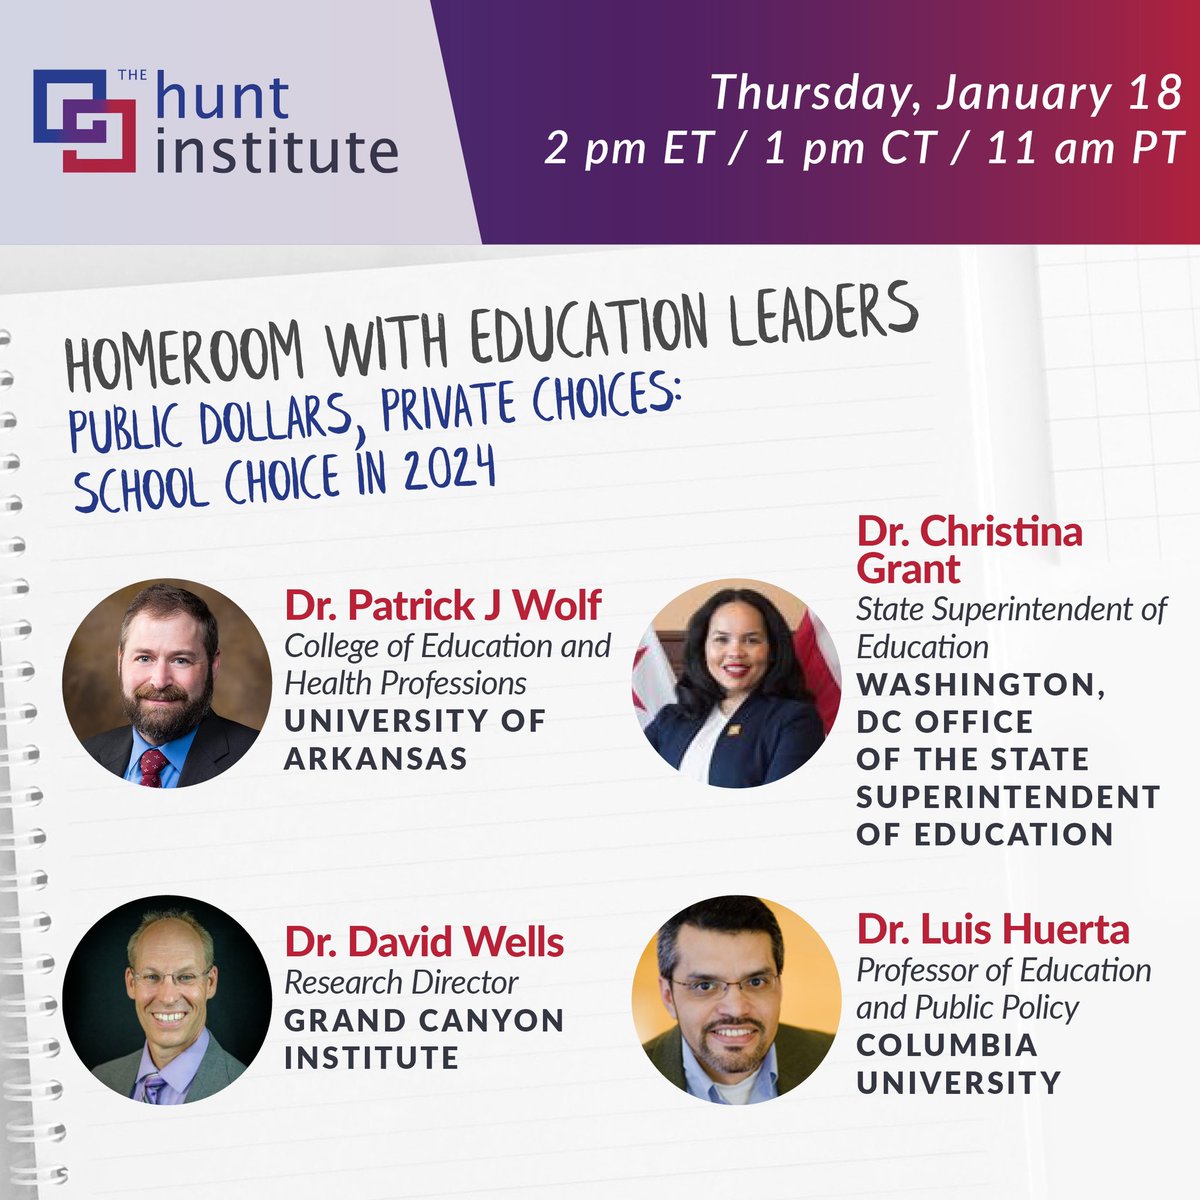 On 1/18, @P_Diddy_Wolf, @DCSuptGrant, Dr. David Wells, and Dr. Luis Huerta will lead an #EdHomeroom webinar with The @Hunt_Institute on school choice in 2024! Register here to attend: ow.ly/KXPa50QjlIa